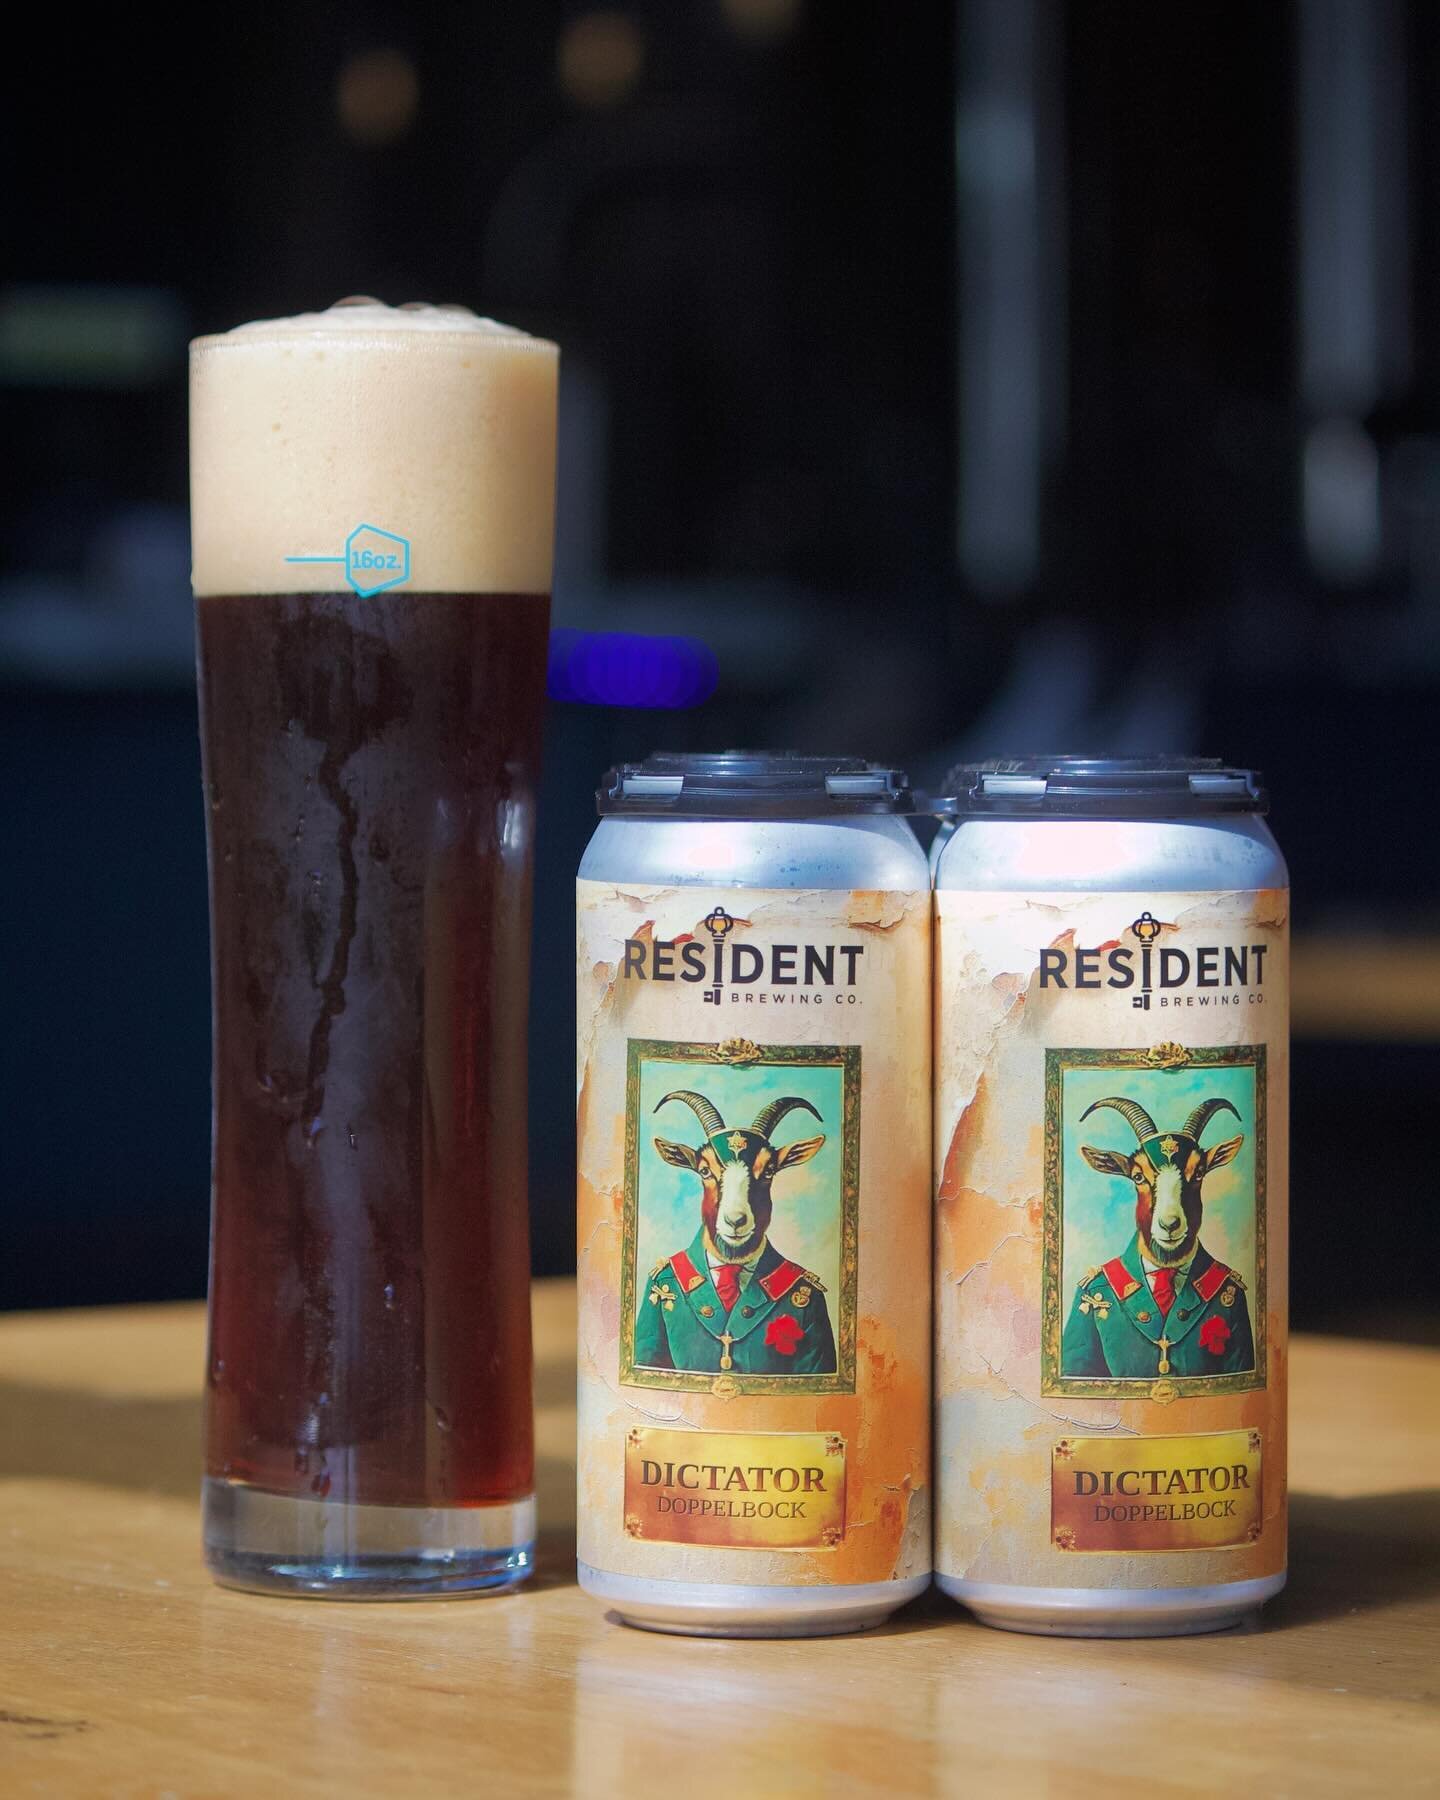 Dictator has arrived. 🐐 
Our latest collab with friends @residentbrewing. This killer Doppelbock is an innovative take on a classic Munich beer style. Sweet roasted malty goodness that stays refreshing to the last drop. 

In cans and on draft!
7.2% 